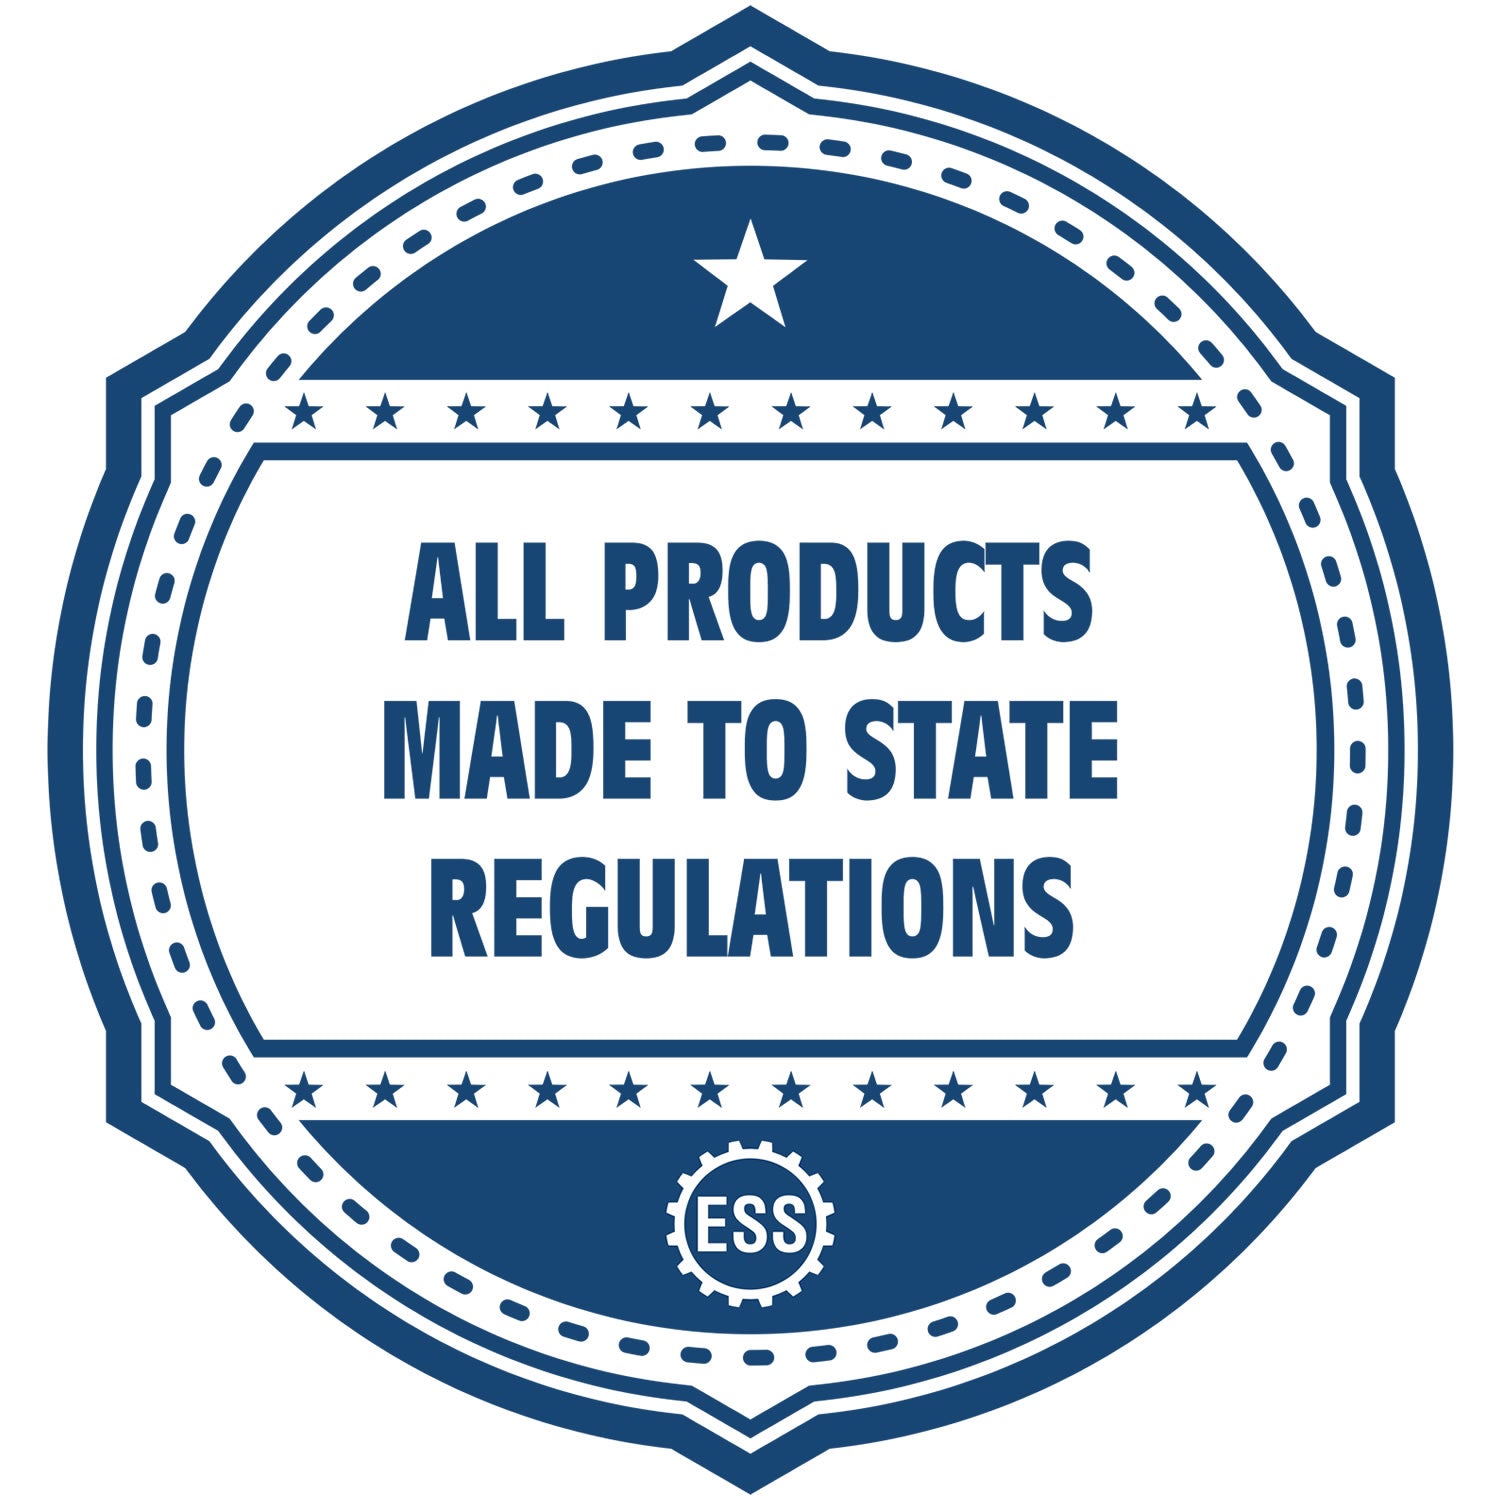 An icon or badge element for the Premium MaxLight Pre-Inked Wisconsin Engineering Stamp showing that this product is made in compliance with state regulations.